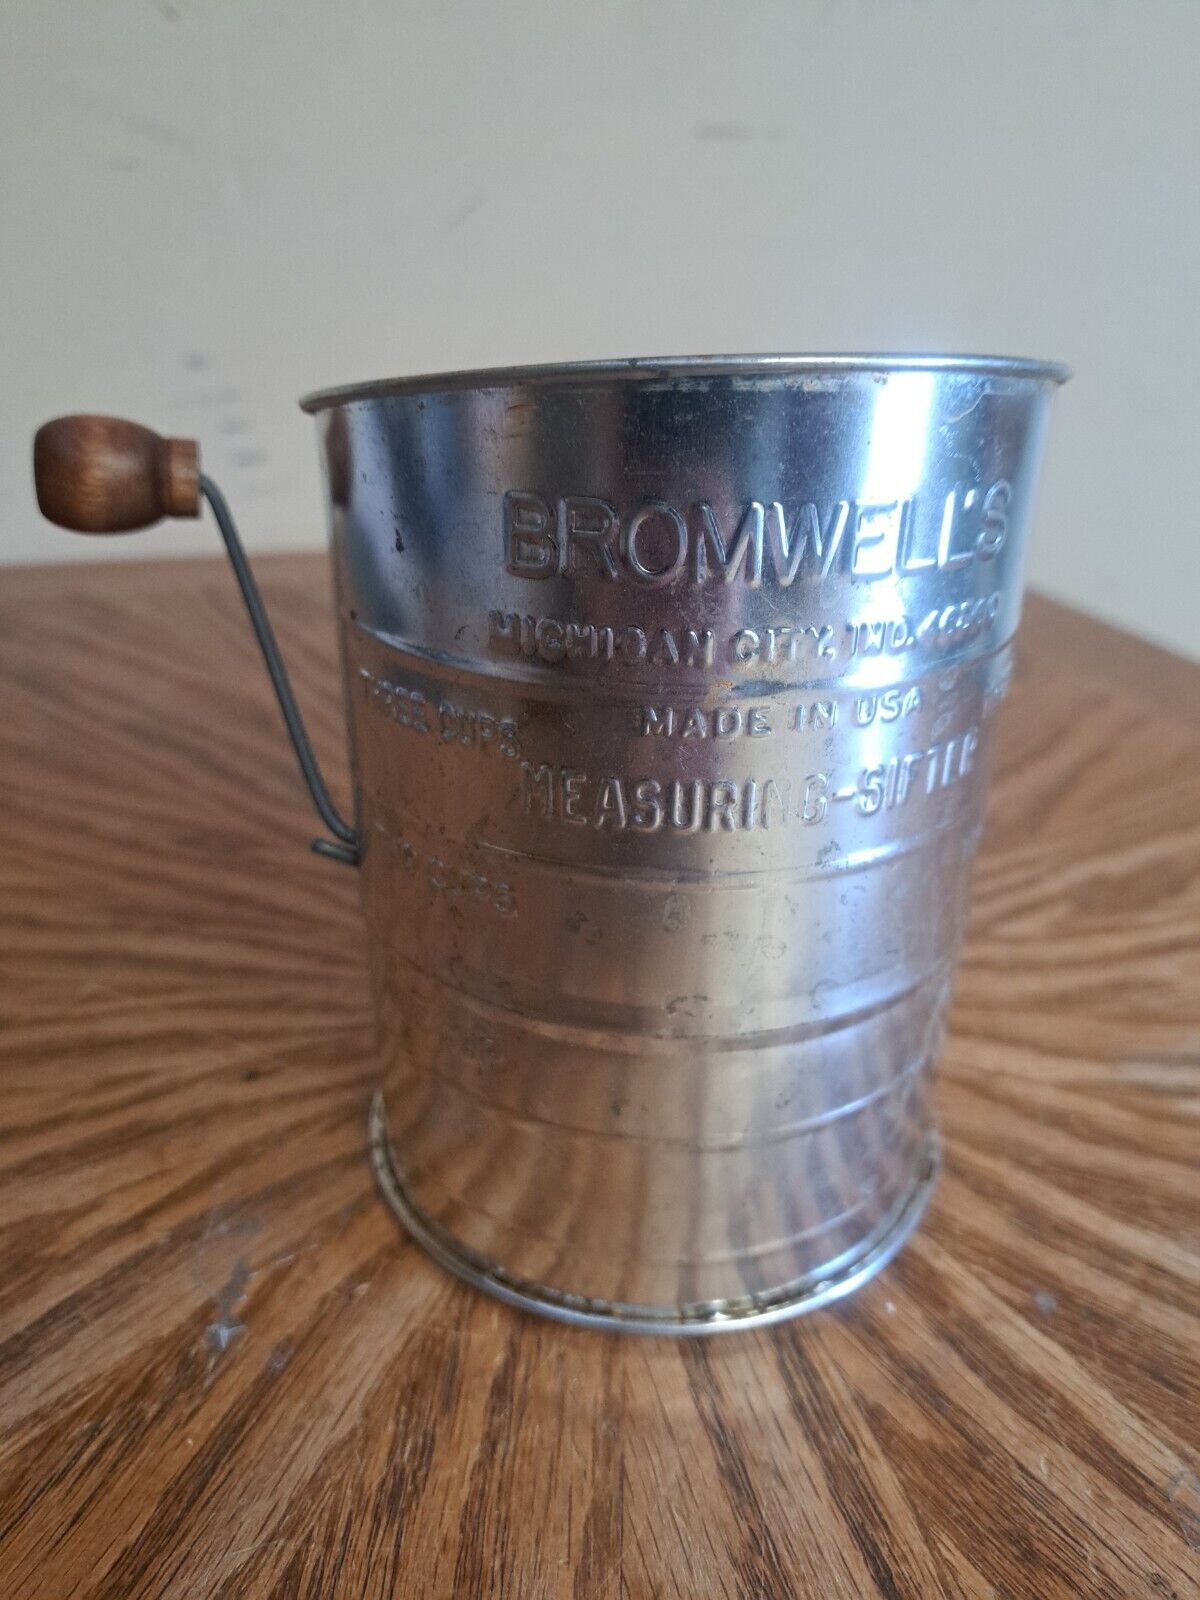 Vintage Bromwell's 3-Cup Metal Measuring Flour Sifter W/Wooden Handle - USA Made